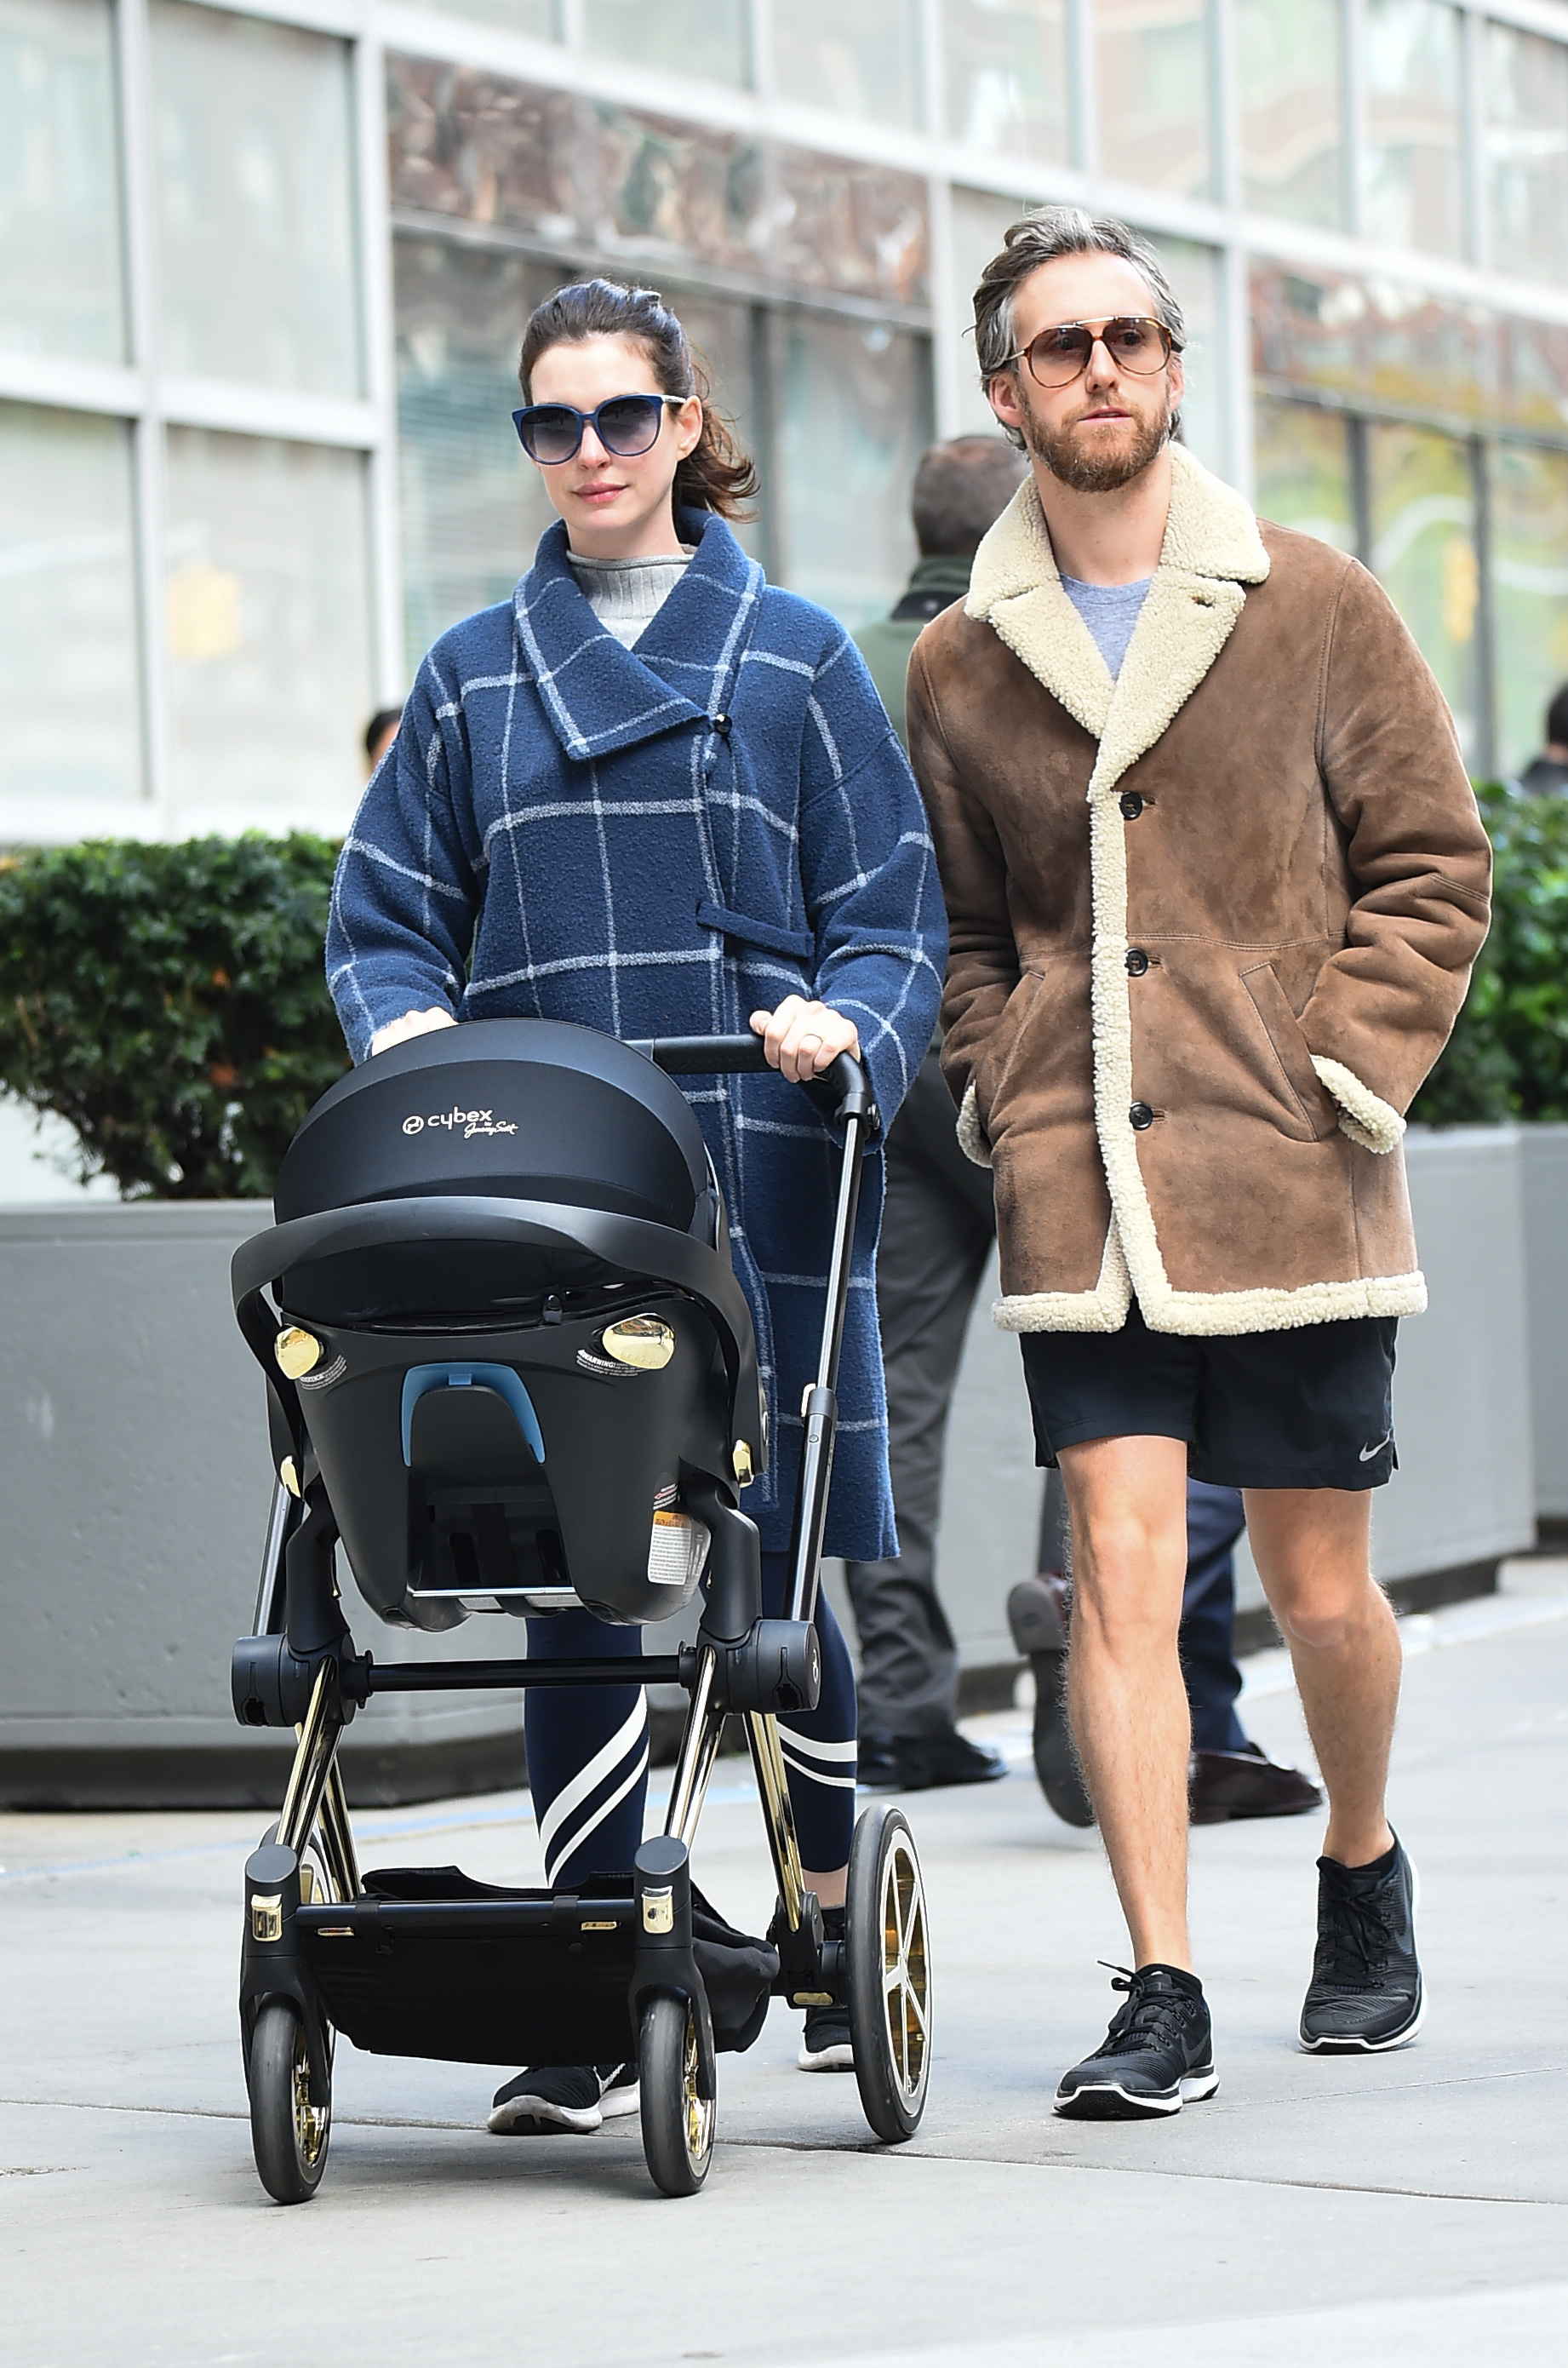 Actress Anne Hathaway and Adam Shulman are seen walking with son Jonathan in Midtown on October 24, 2016 in New York City | Source: Getty Images